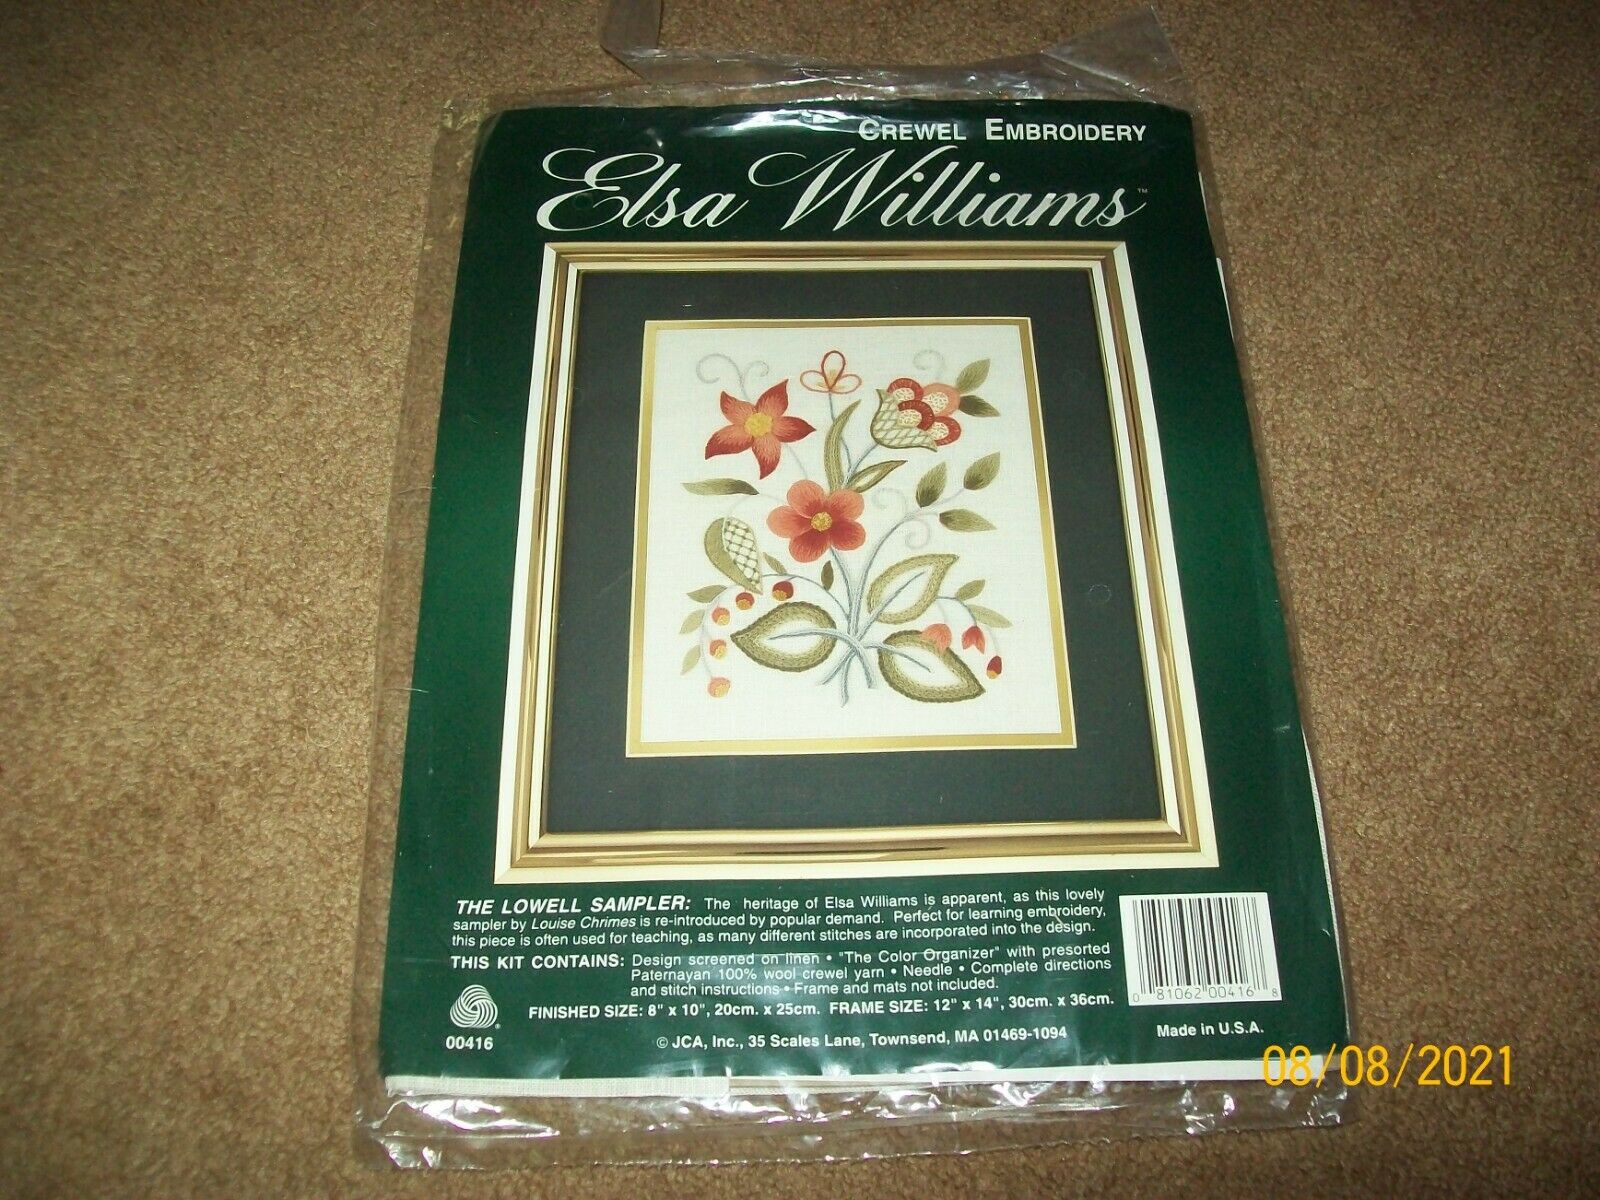 Elsa Williams Crewel Embroidery Kit  The Lowell Sampler  #00416 Opened Package